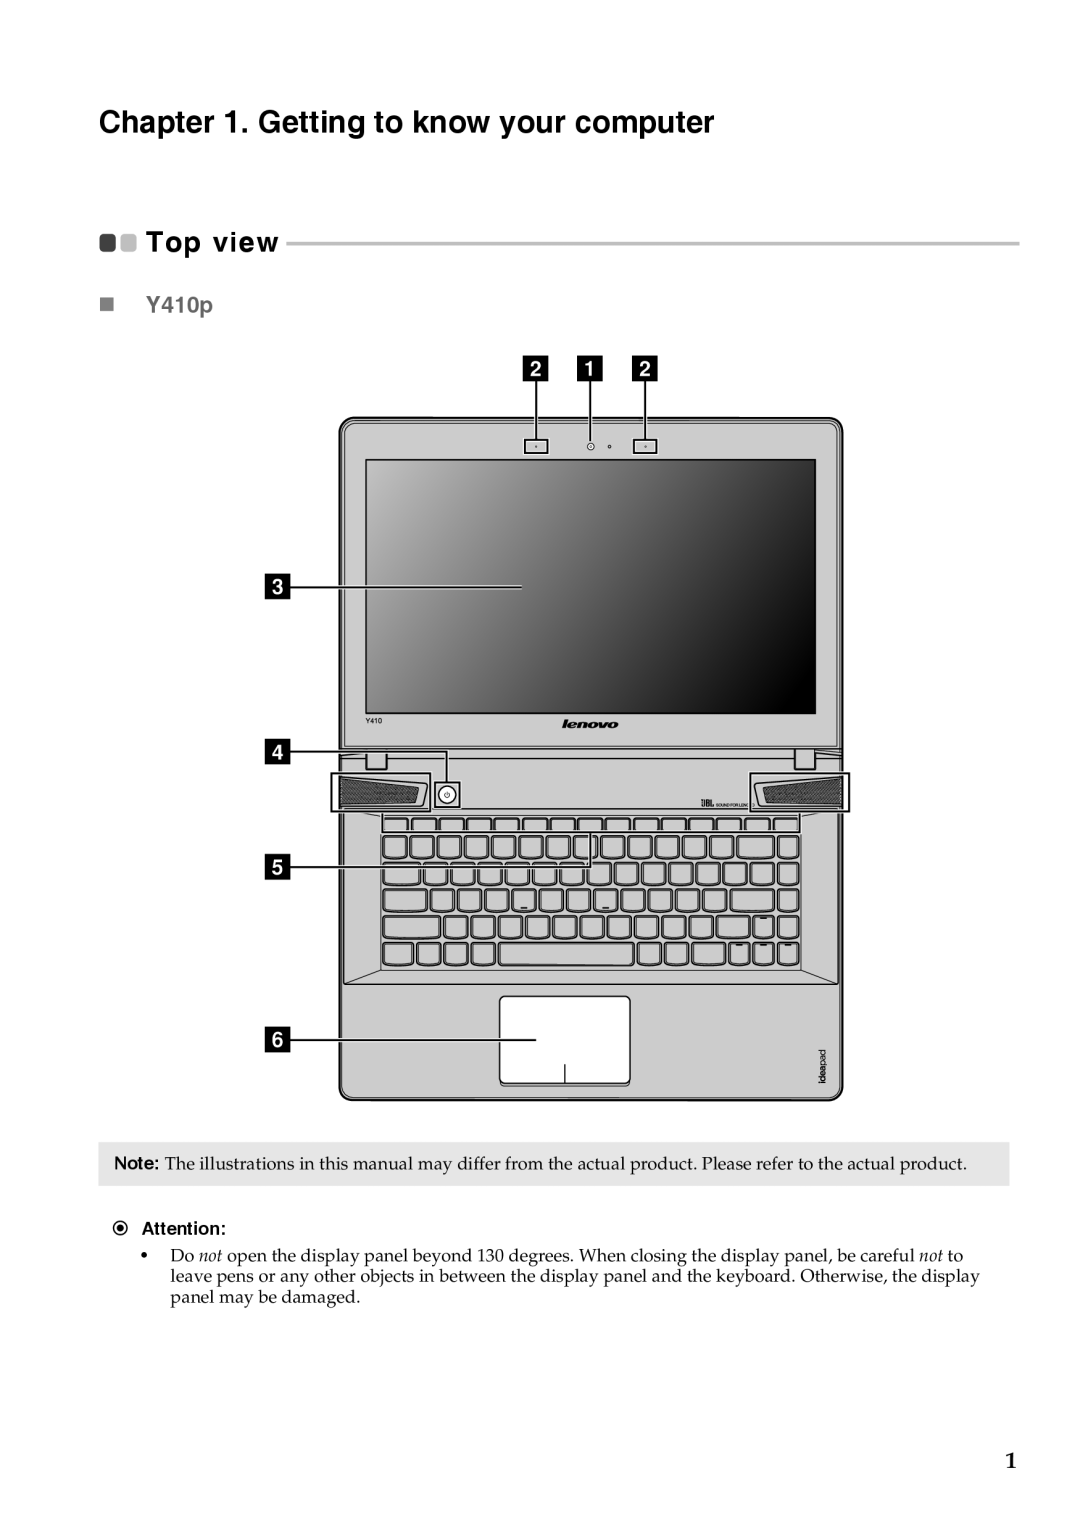 Lenovo 59375625, 59375627, 59376431 manual Getting to know your computer, b a b, d e f,  Y410p, Top view 